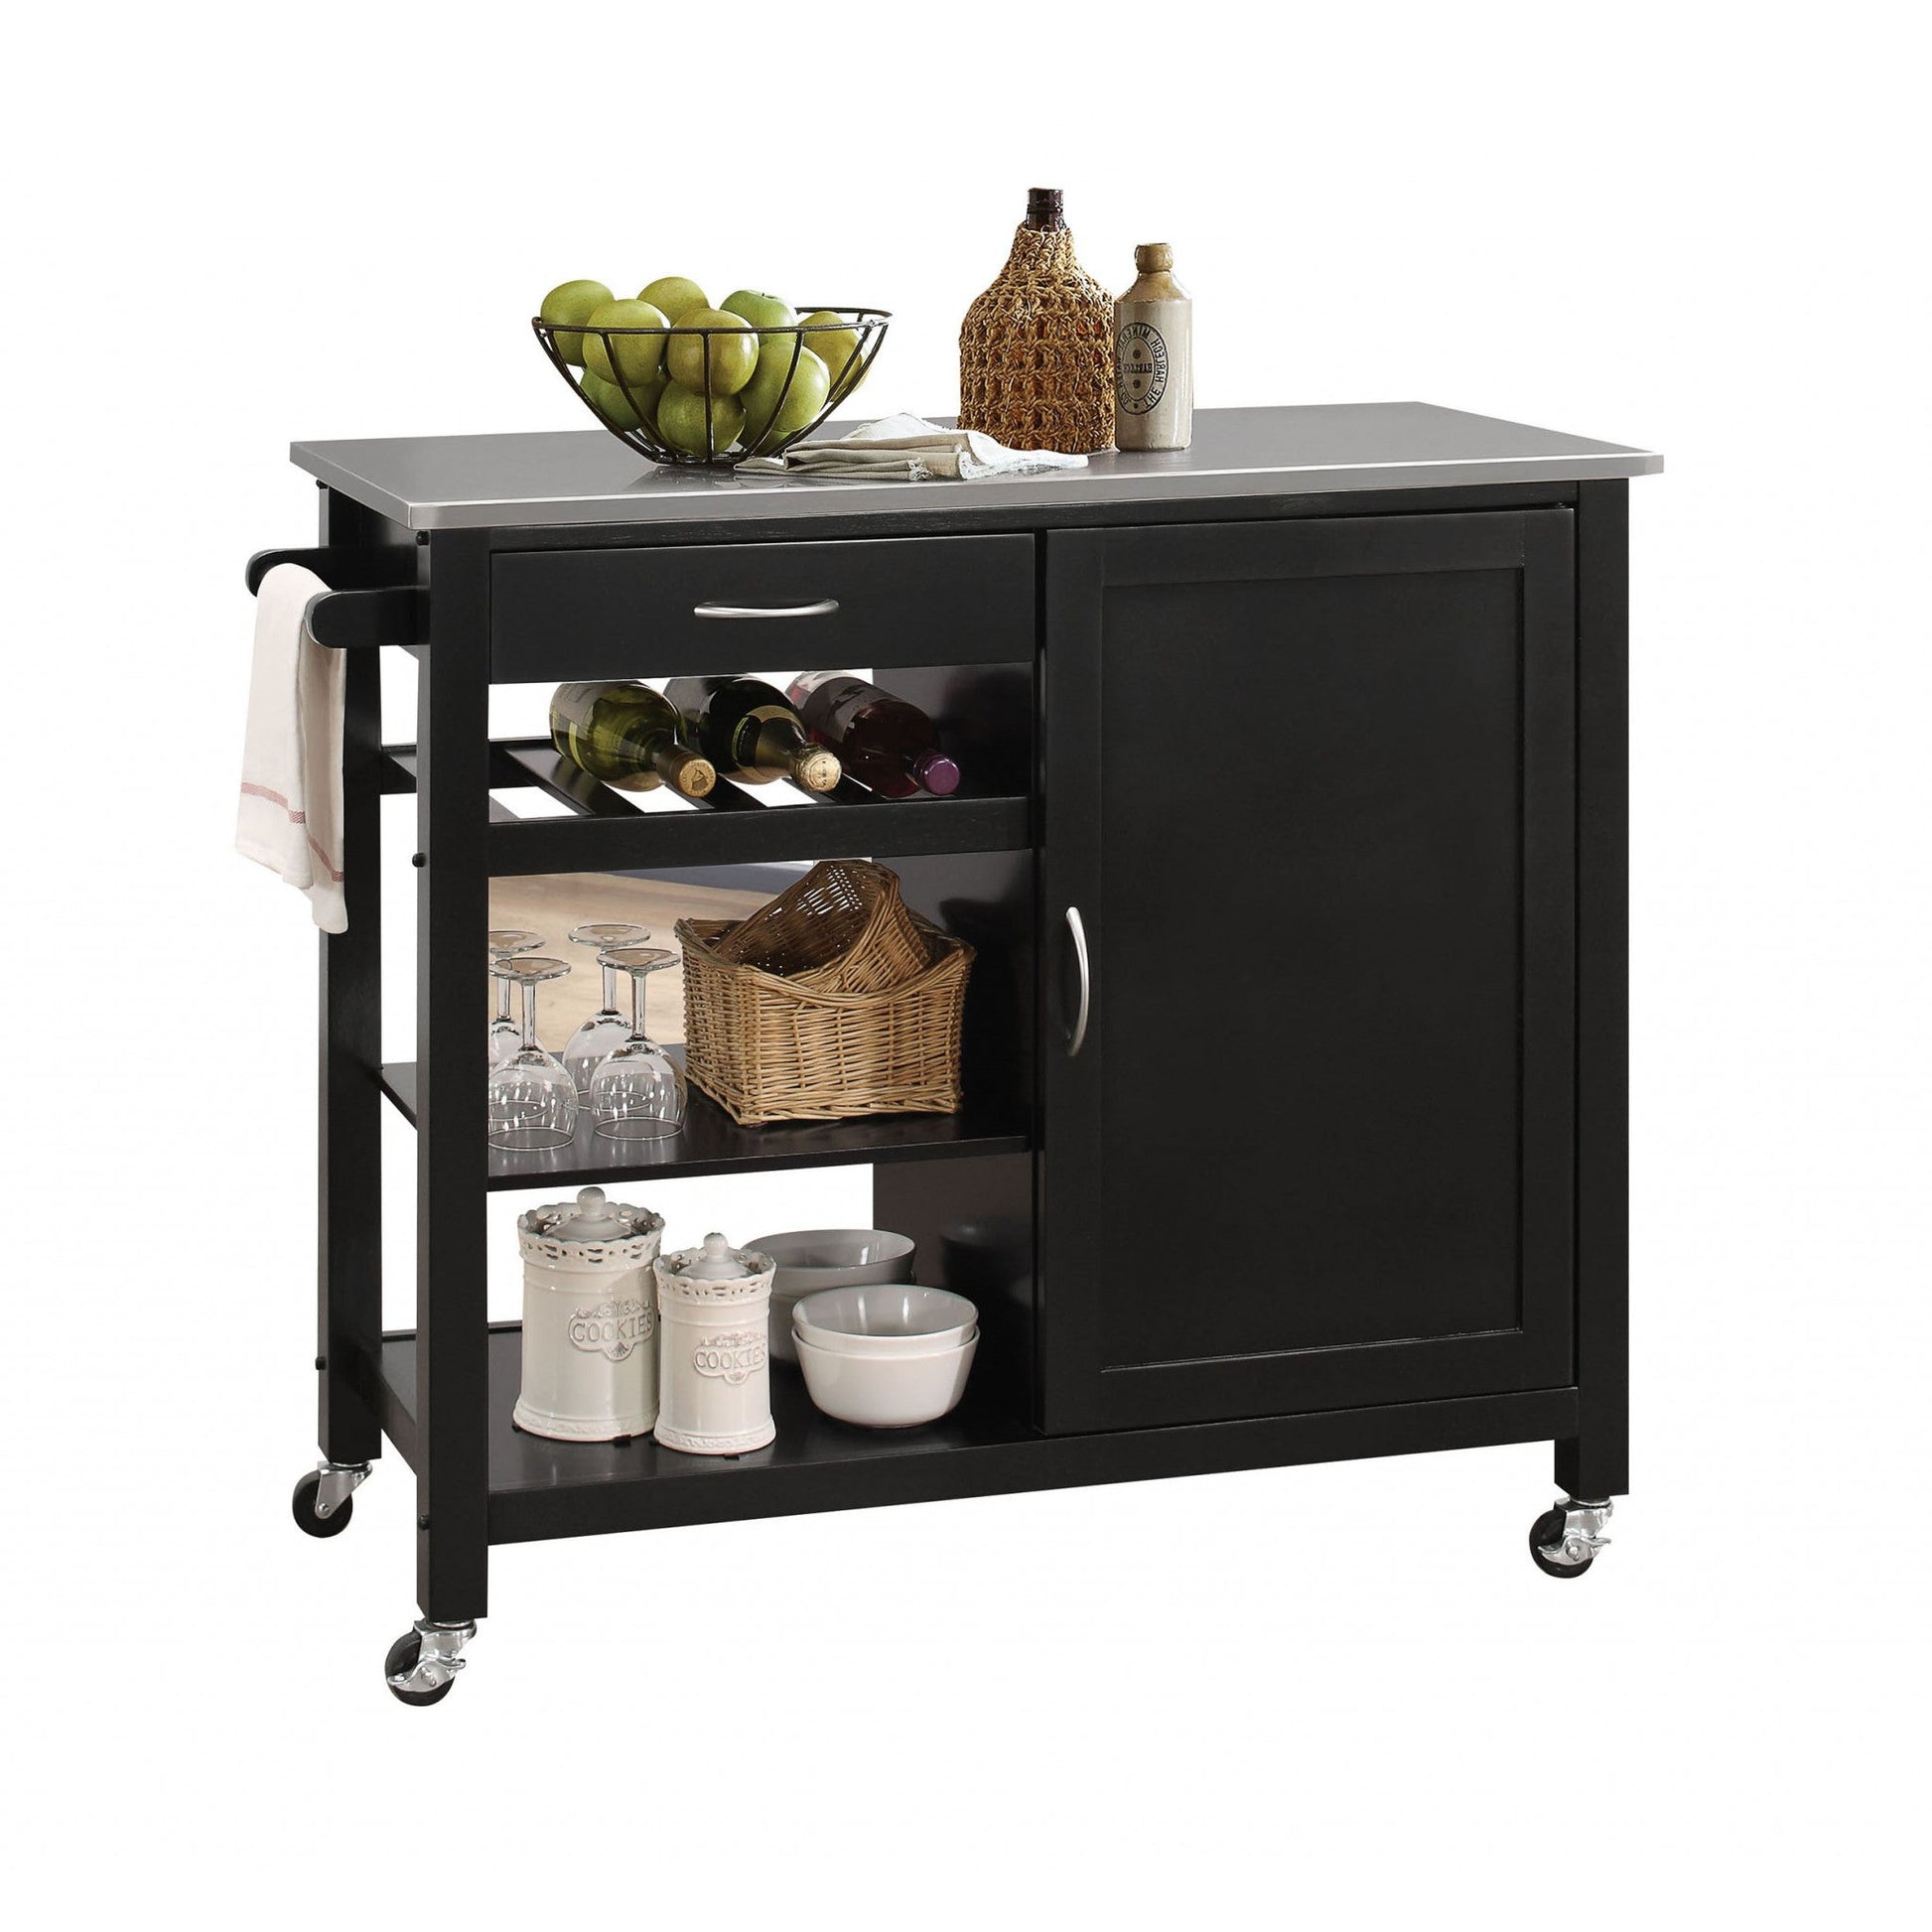 HomeRoots 42" x 18" x 34" Stainless Steel And Black Kitchen Island